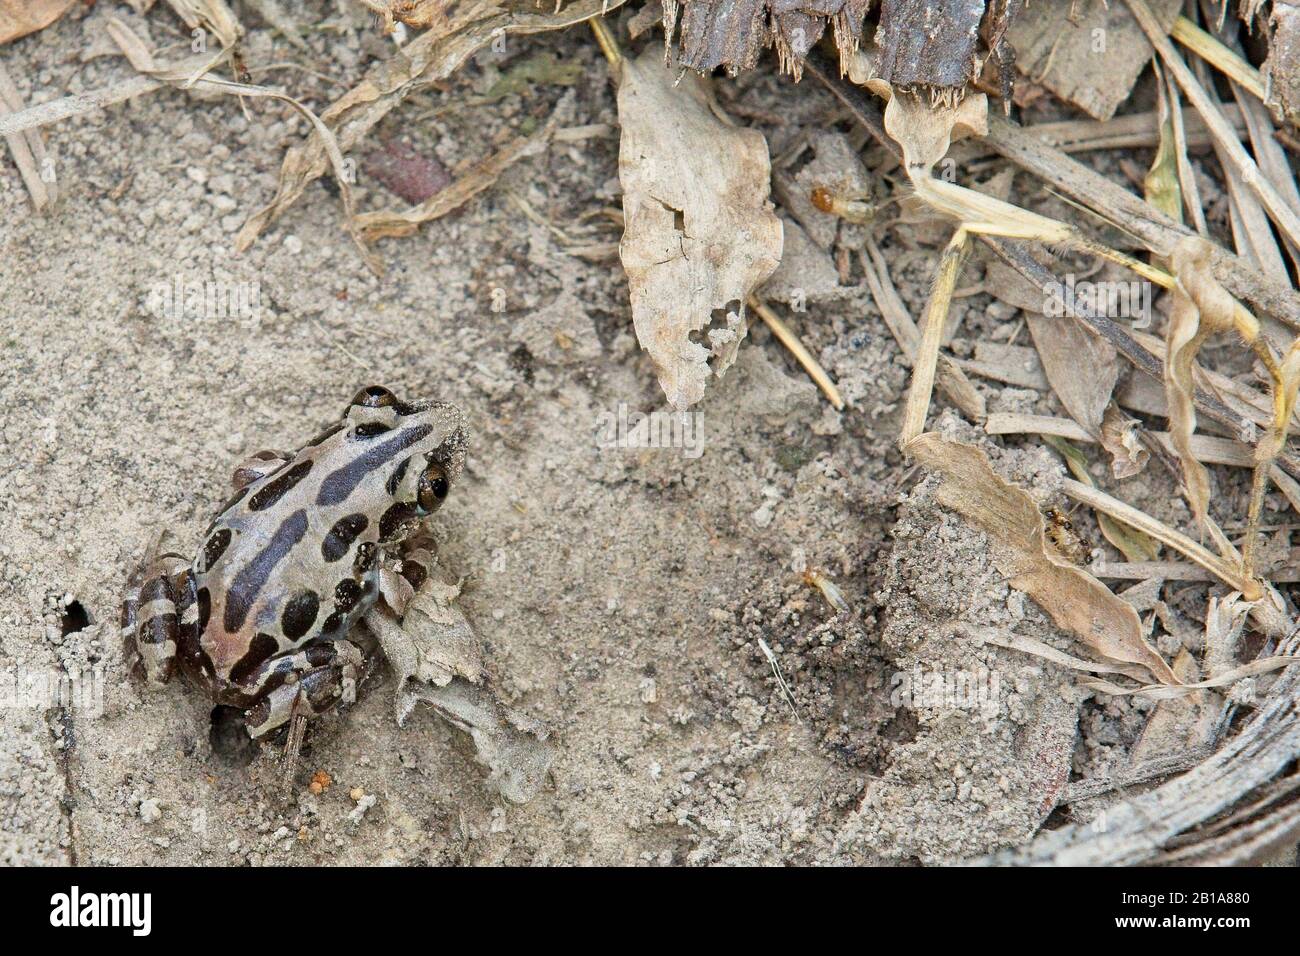 Brown Running Frog (Kassina fusca), Kunkilling Forest Reserve, Gambia. Stock Photo